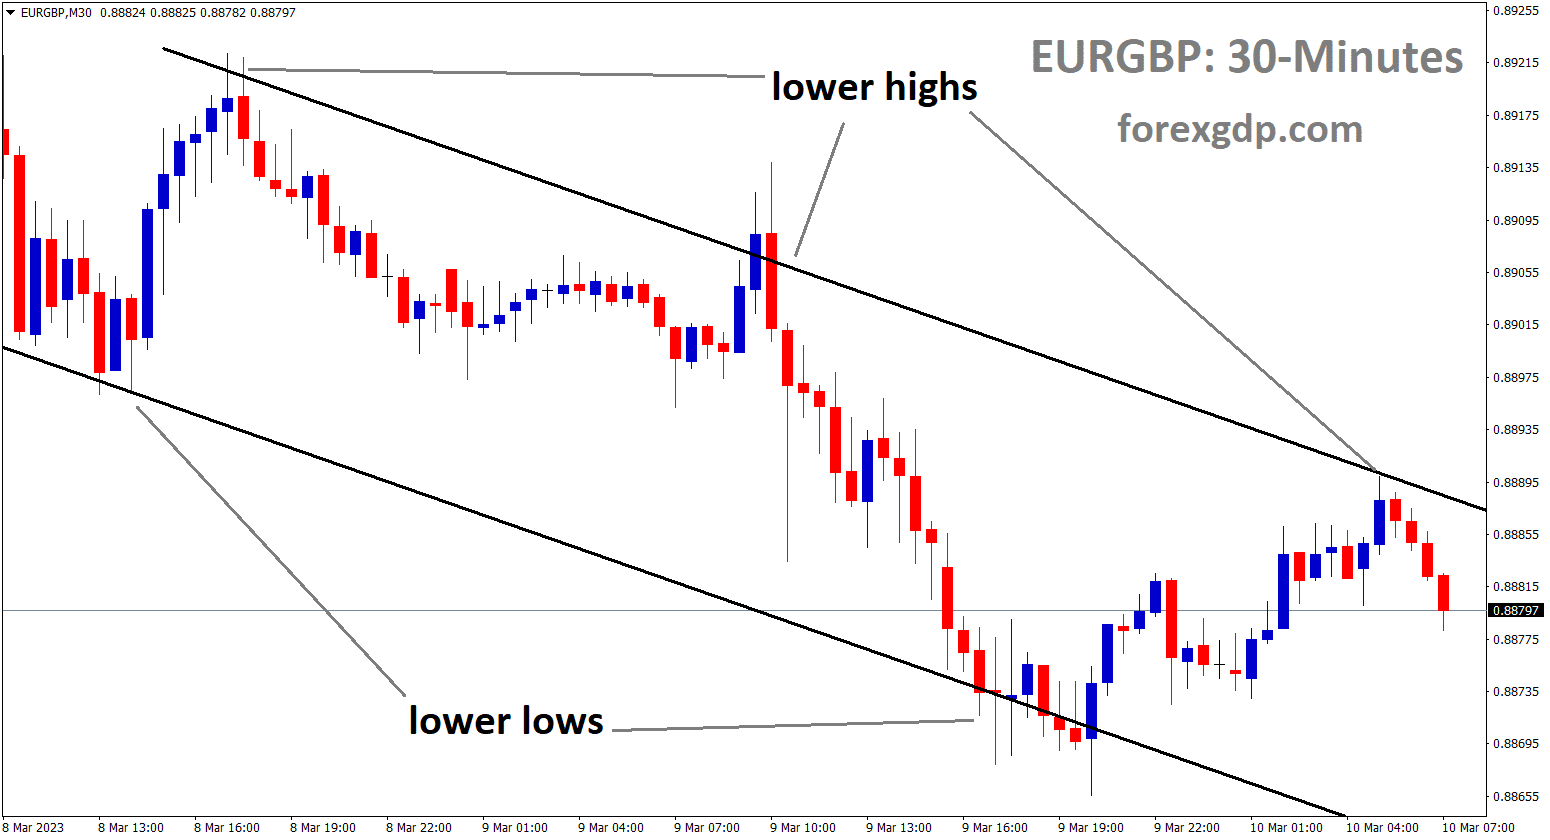 EURGBP is moving in descending channel and the market has reached lower high area of the channel.